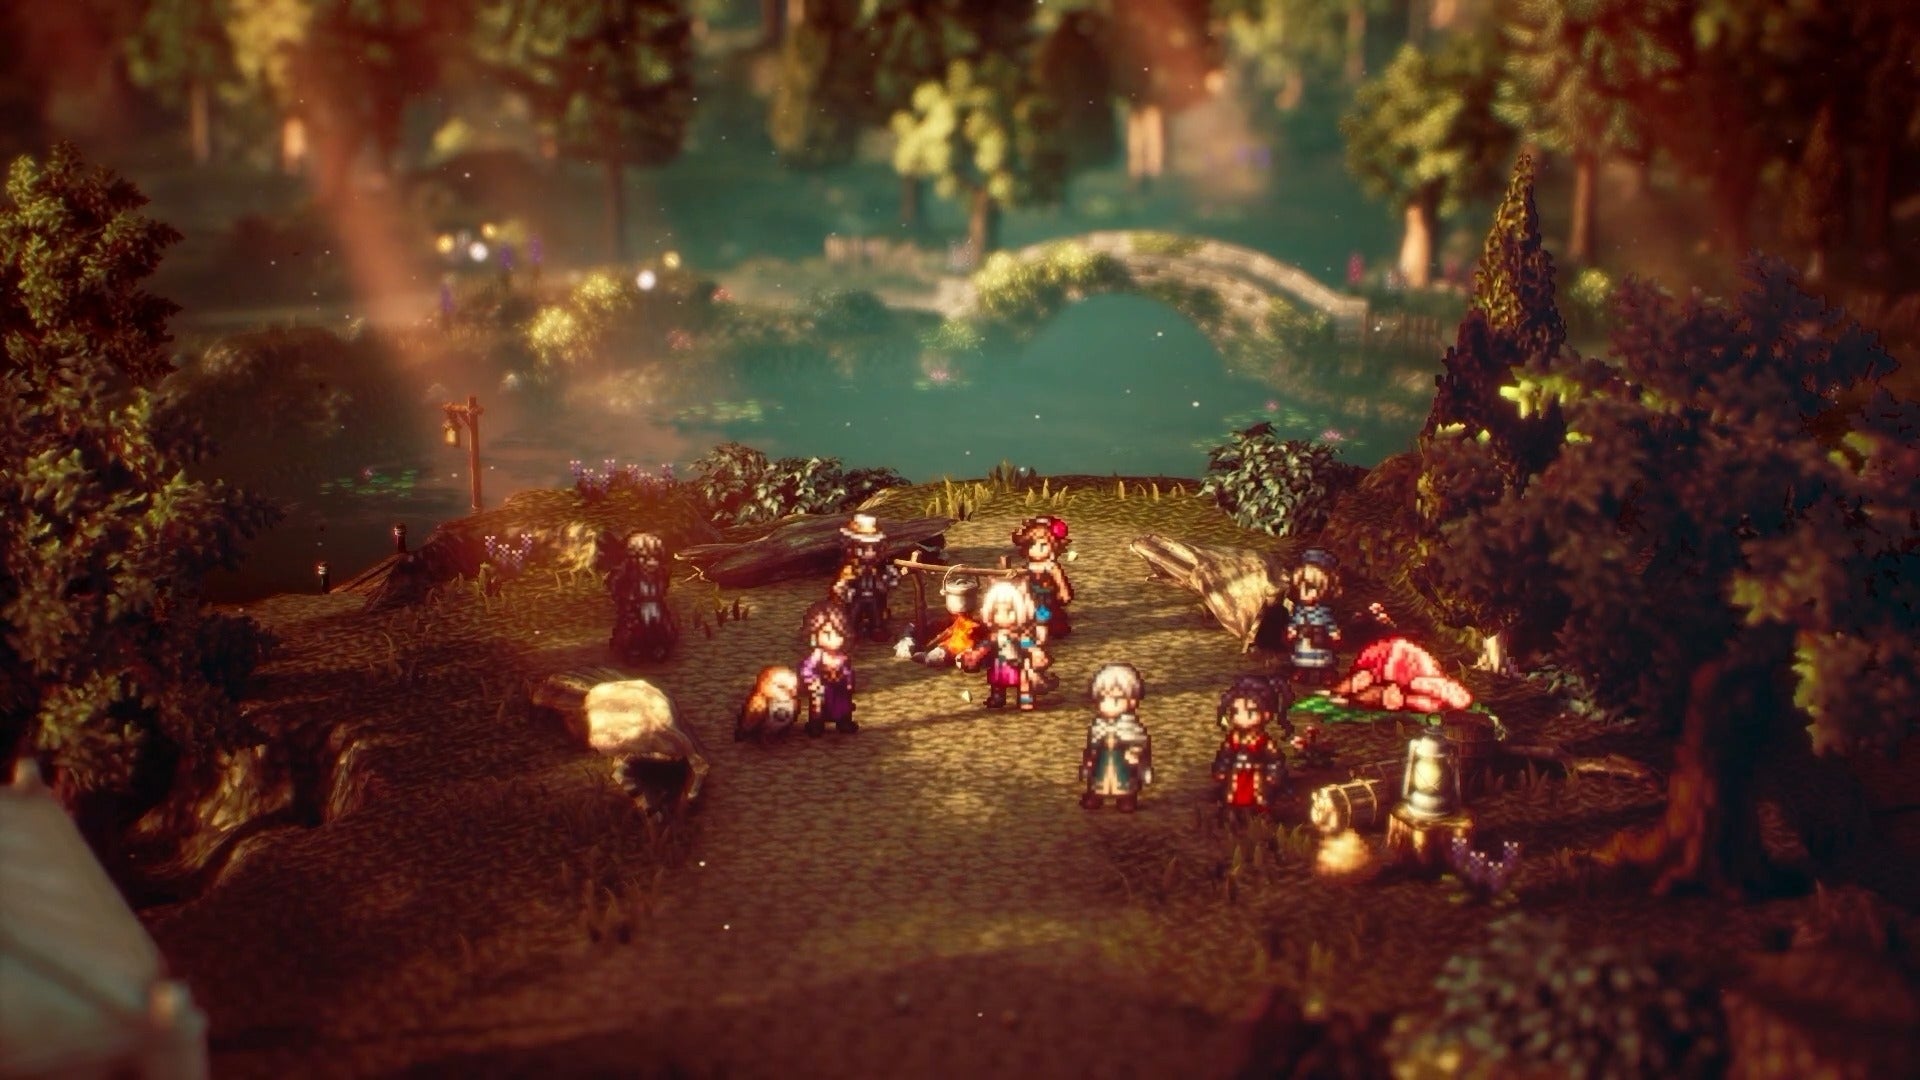 metacritic on X: Octopath Traveler (Switch) reviews go up